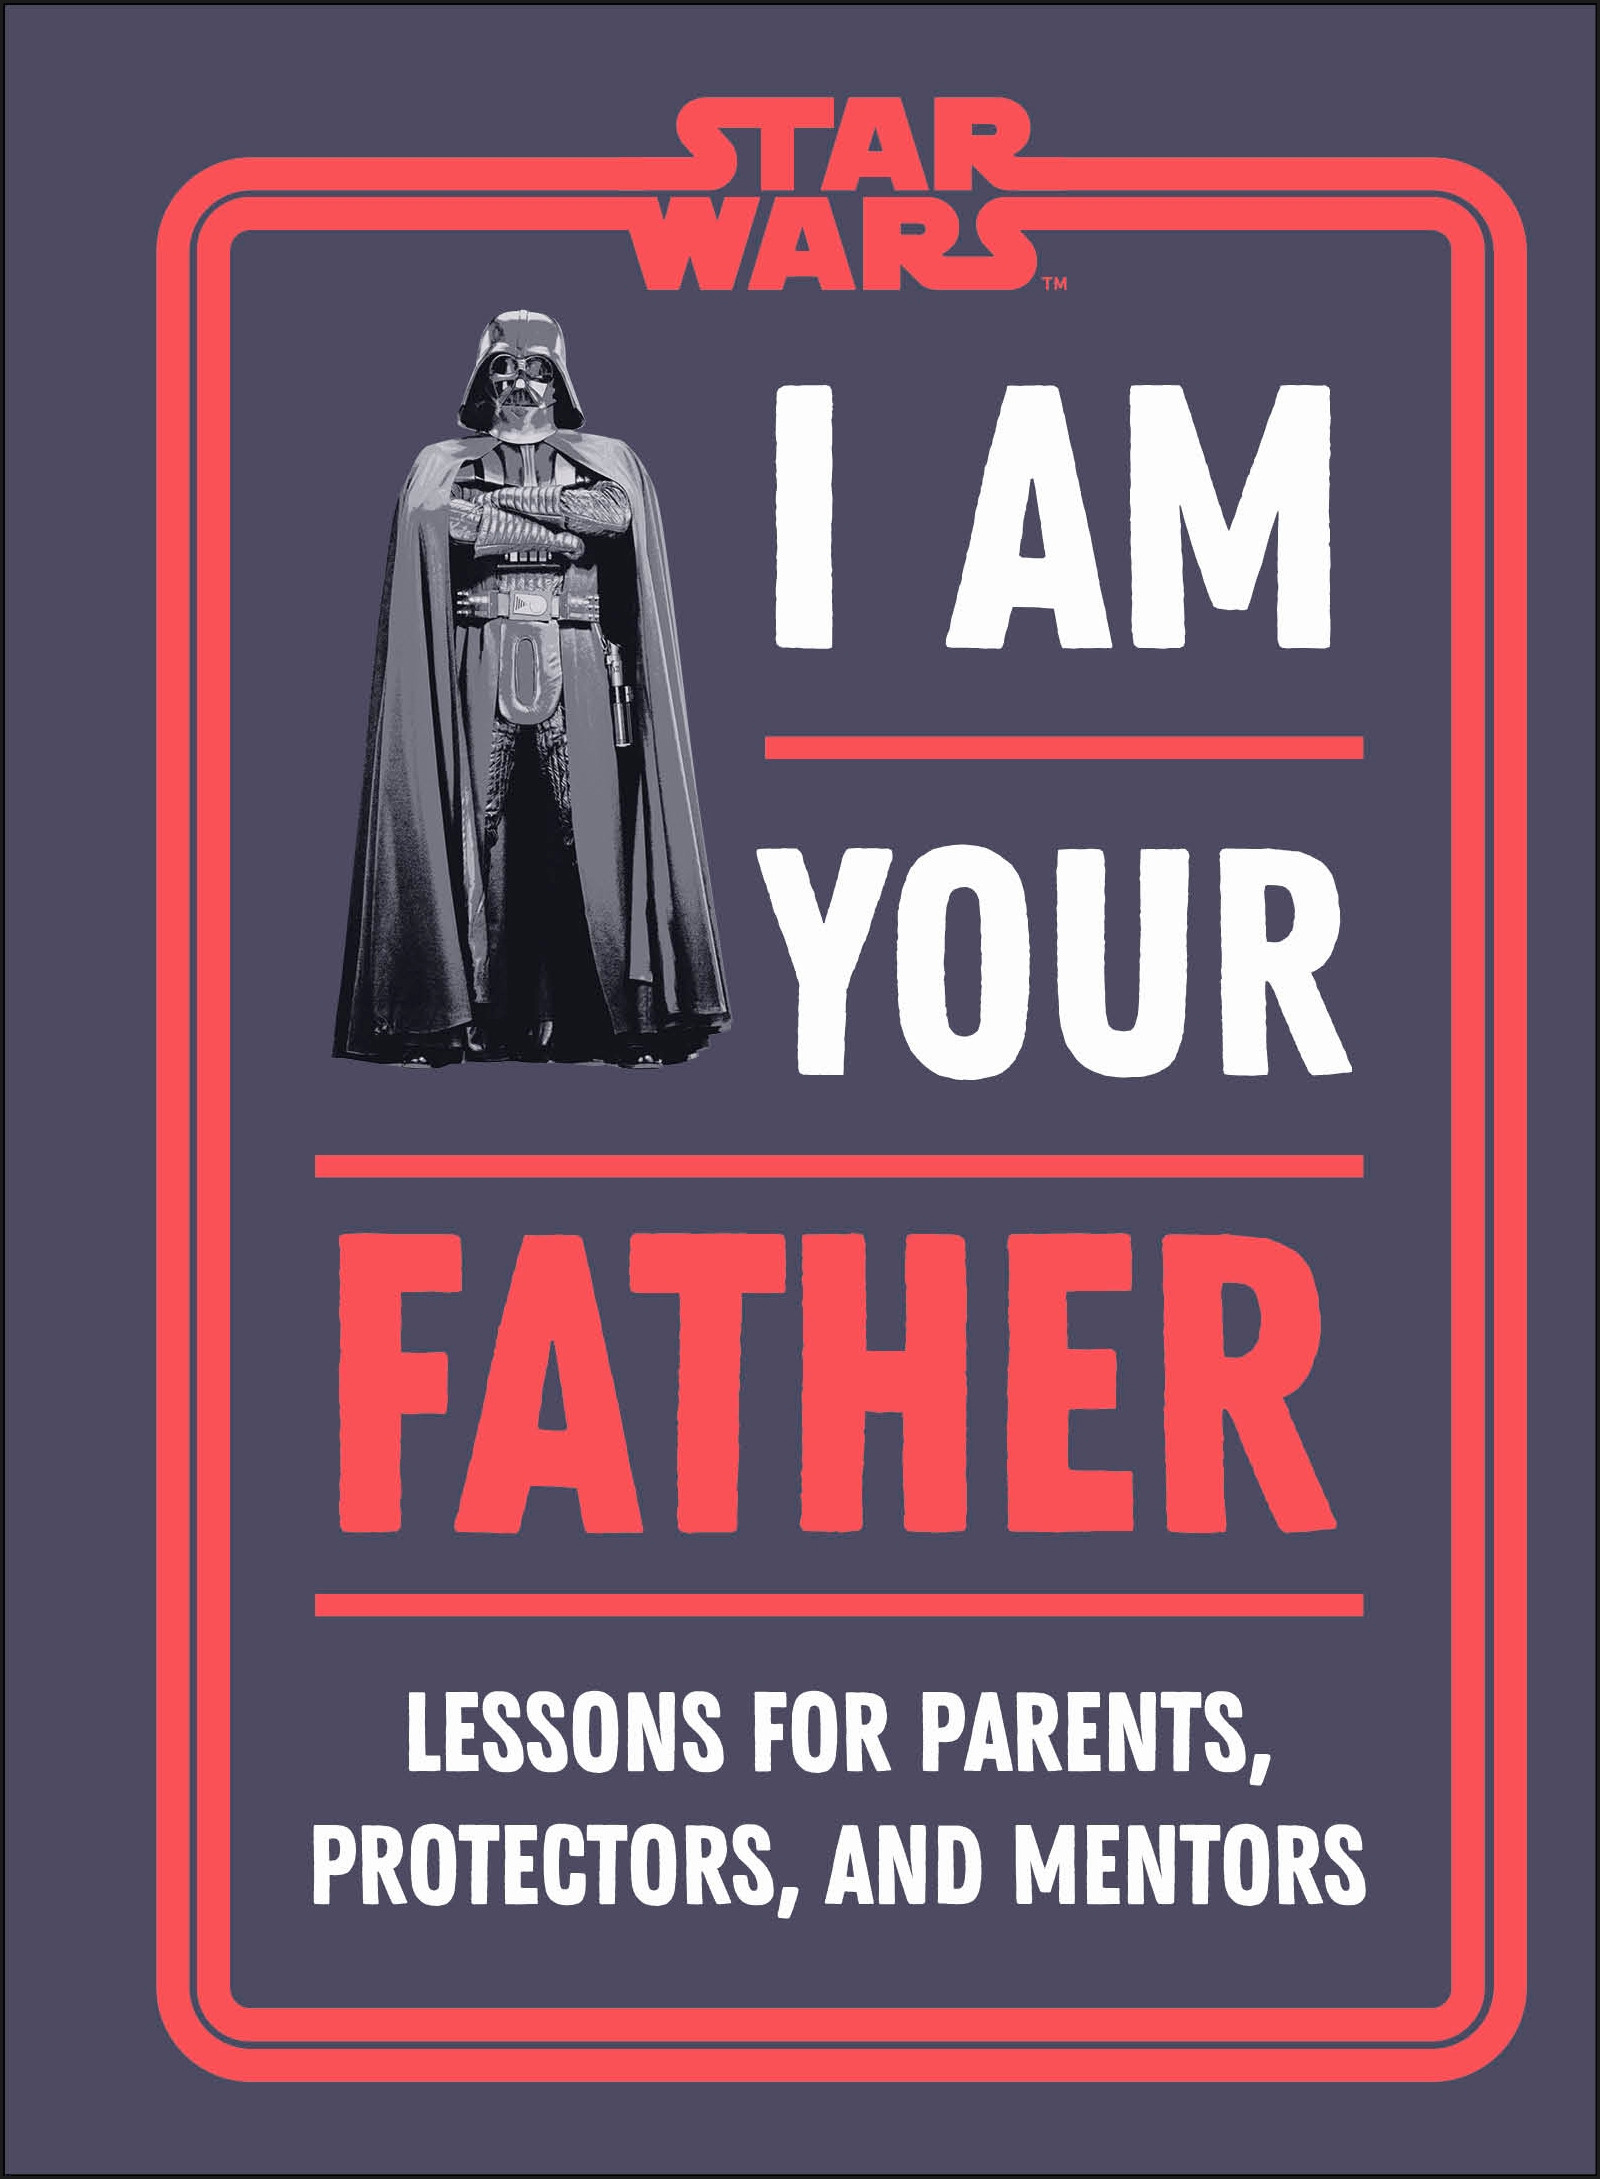 Star Wars I Am Your Father : Lessons for Parents, Protectors, and Mentors | Parenting